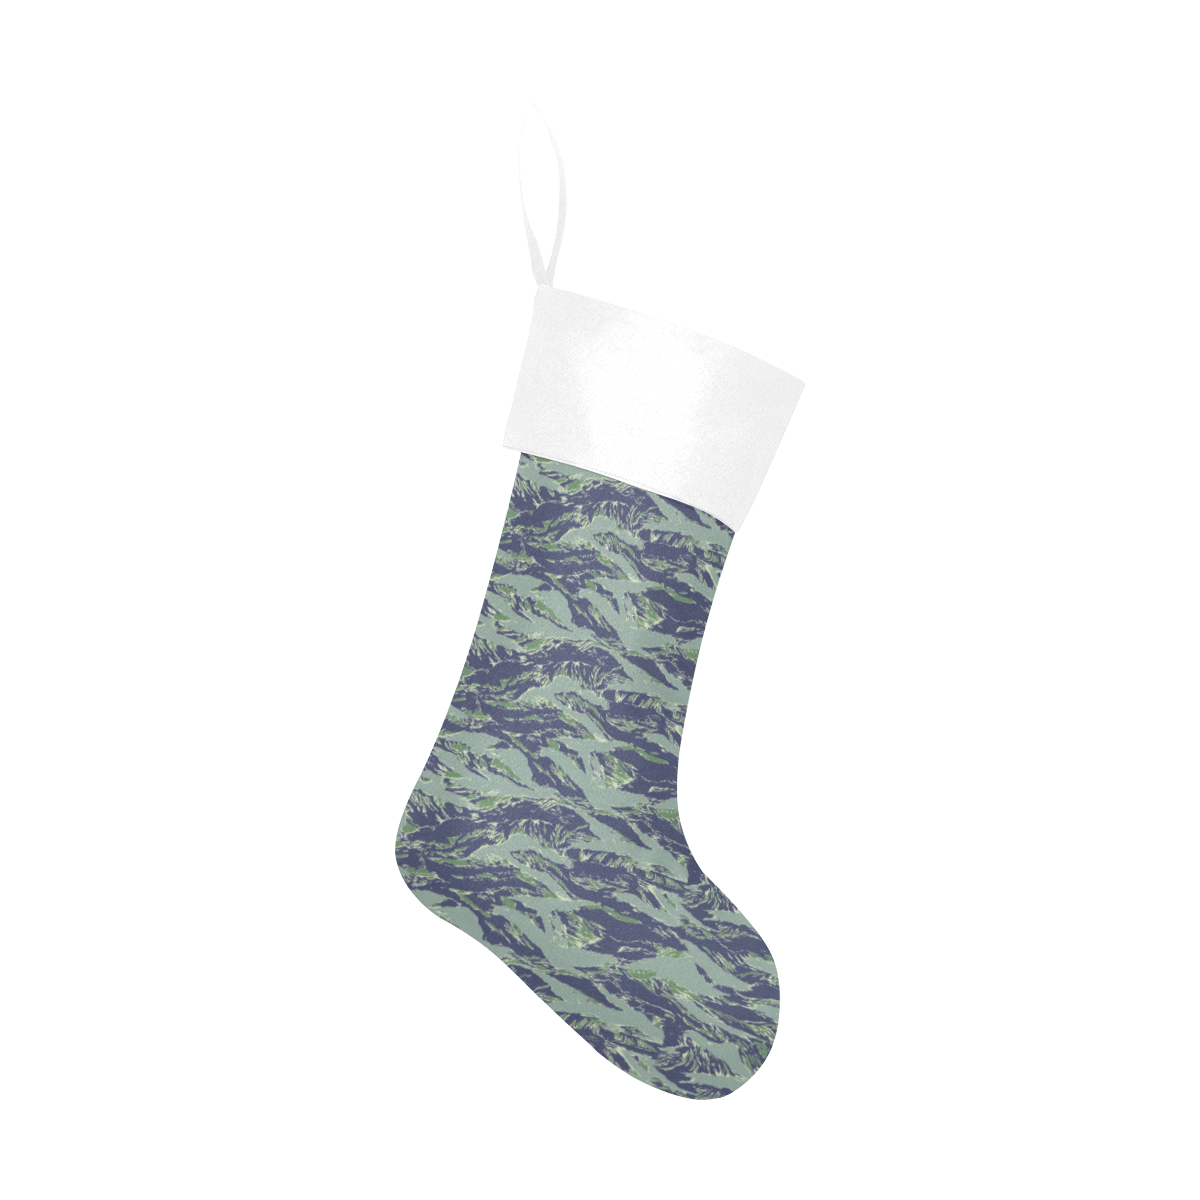 Jungle Tiger Stripe Green Camouflage Christmas Stocking